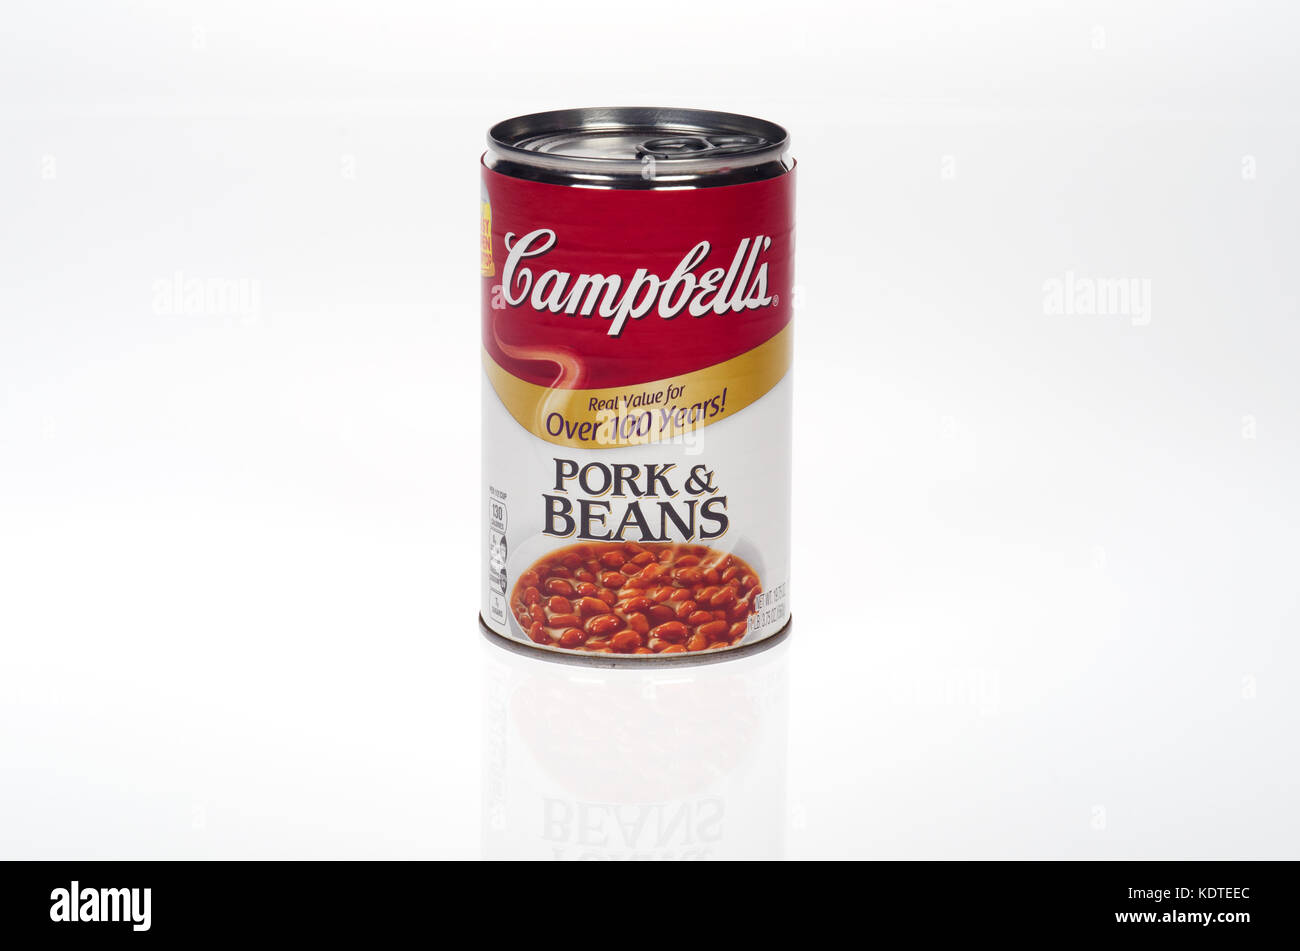 Tin of Campbell’s Pork and Beans on white background, cutout USA Stock Photo